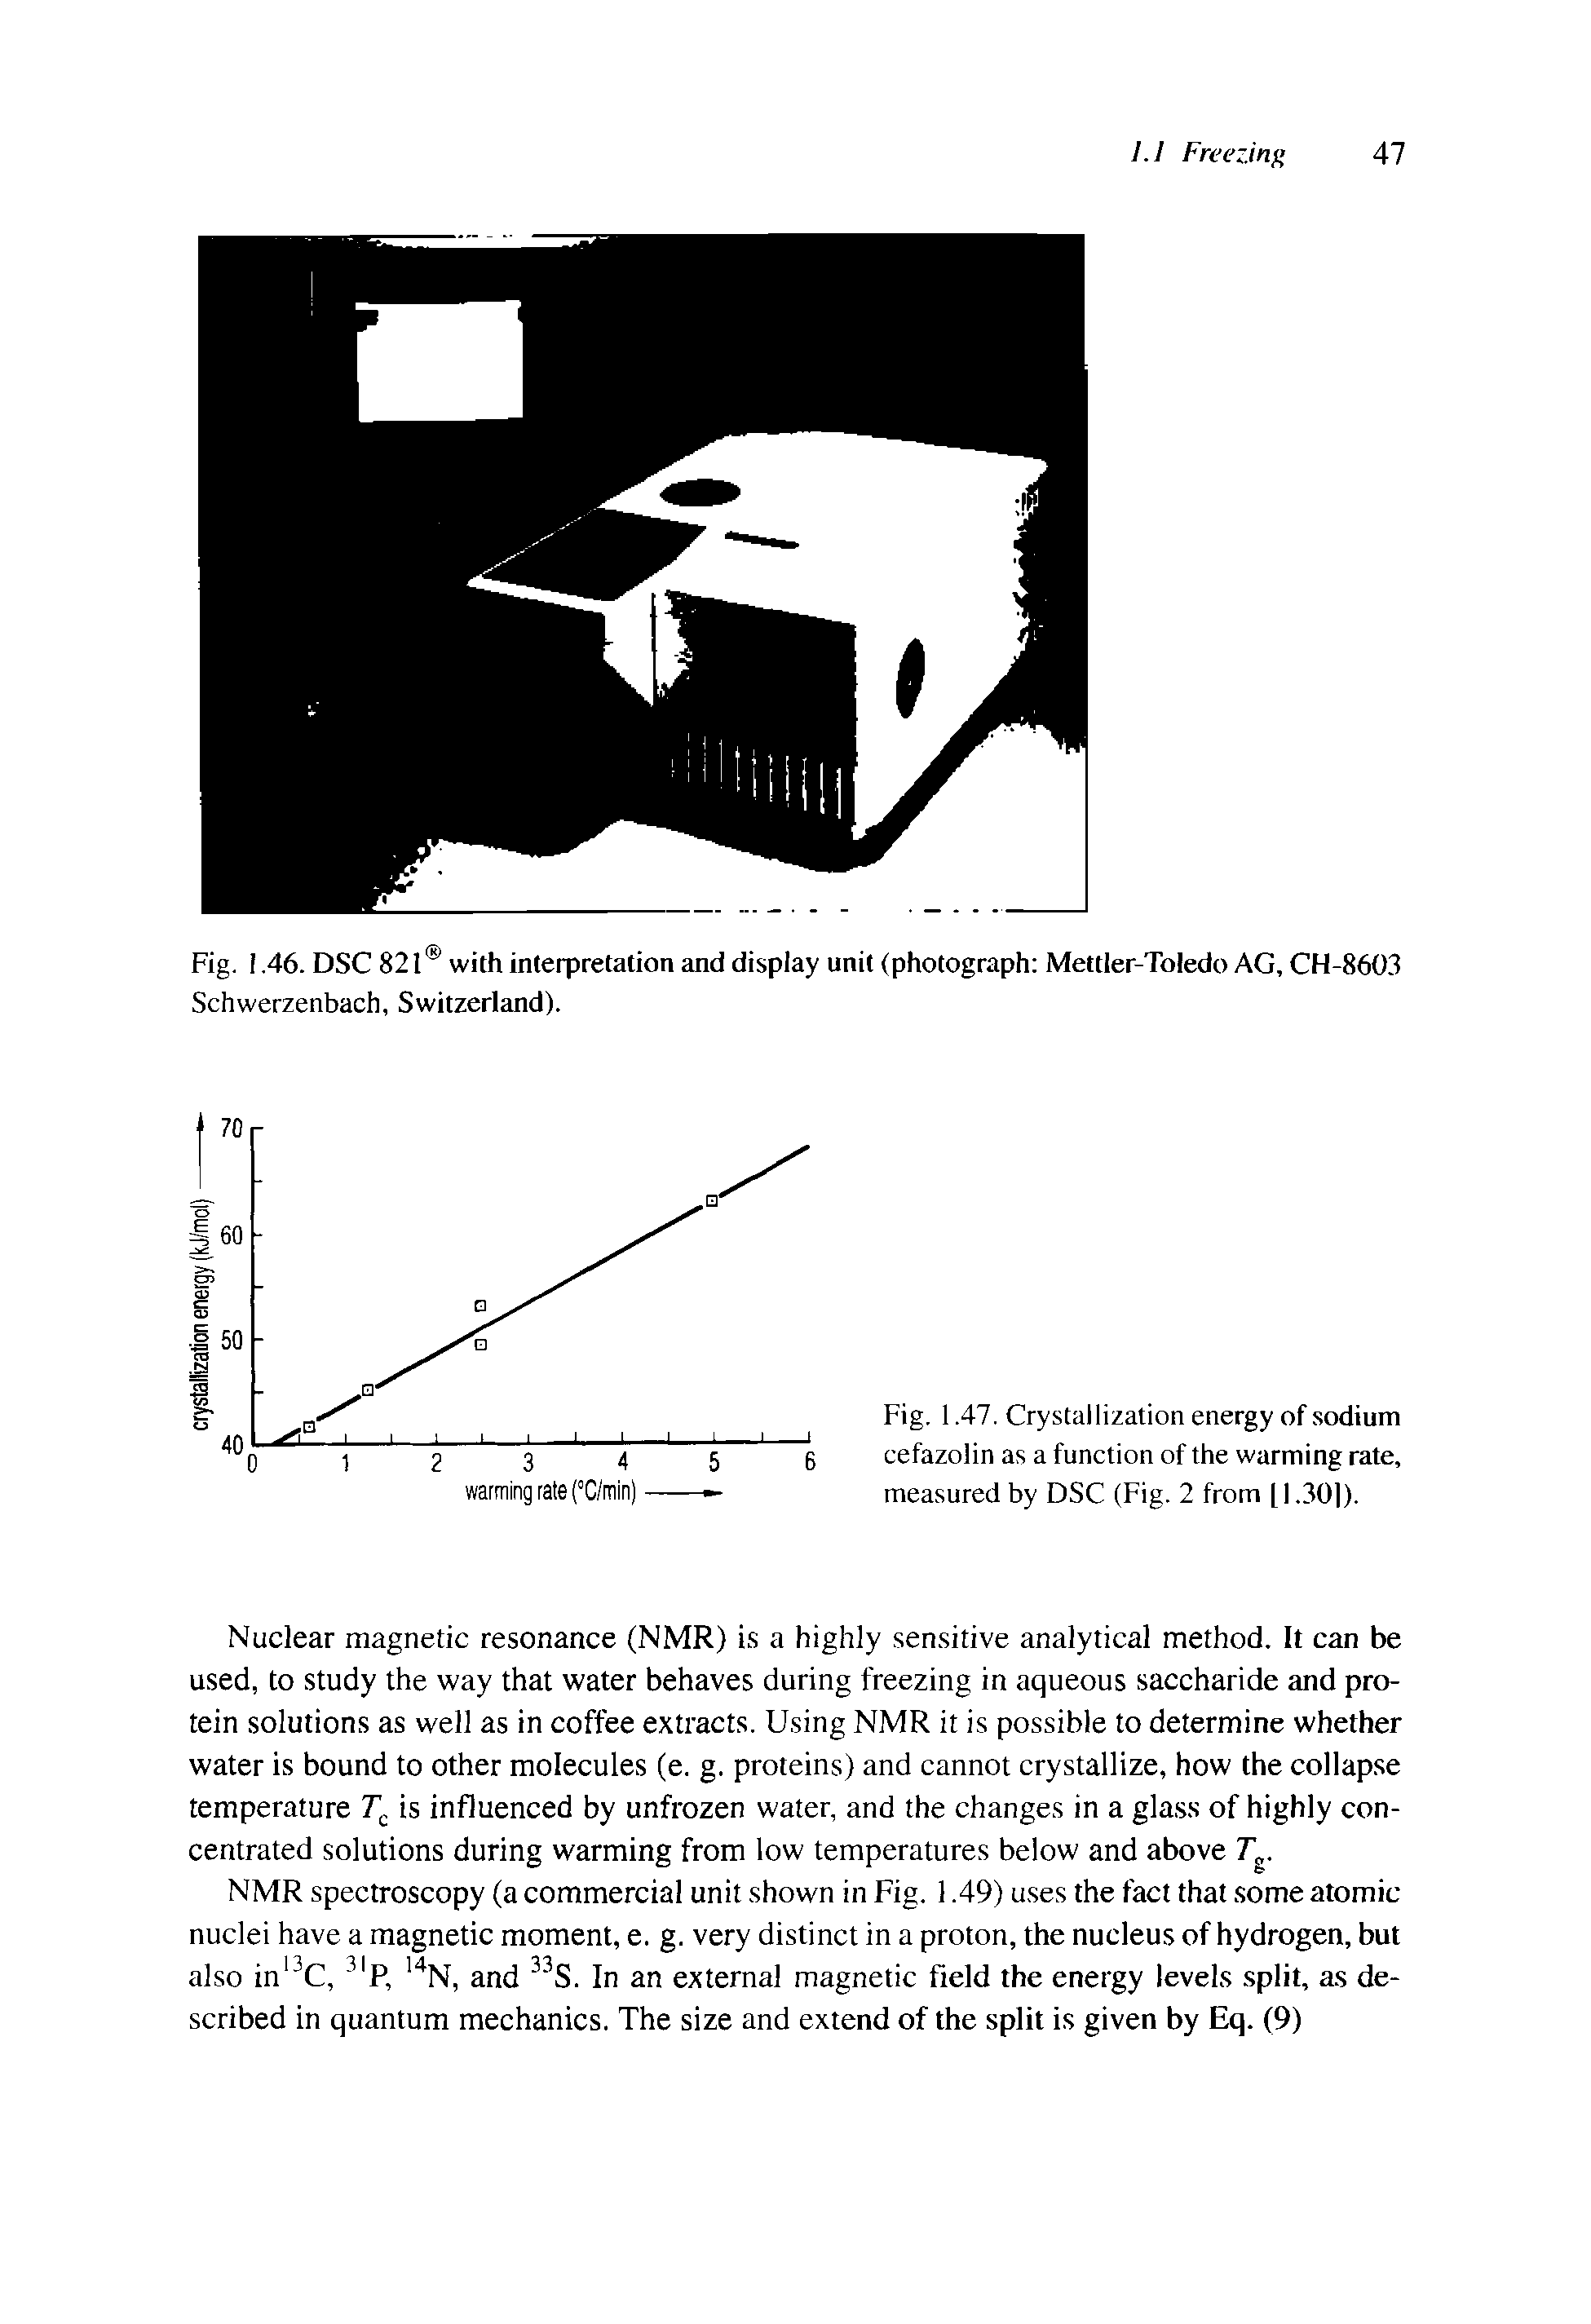 Fig. 1.47. Crystallization energy of sodium cefazolin as a function of the warming rate, measured by DSC (Fig. 2 from [1.301).